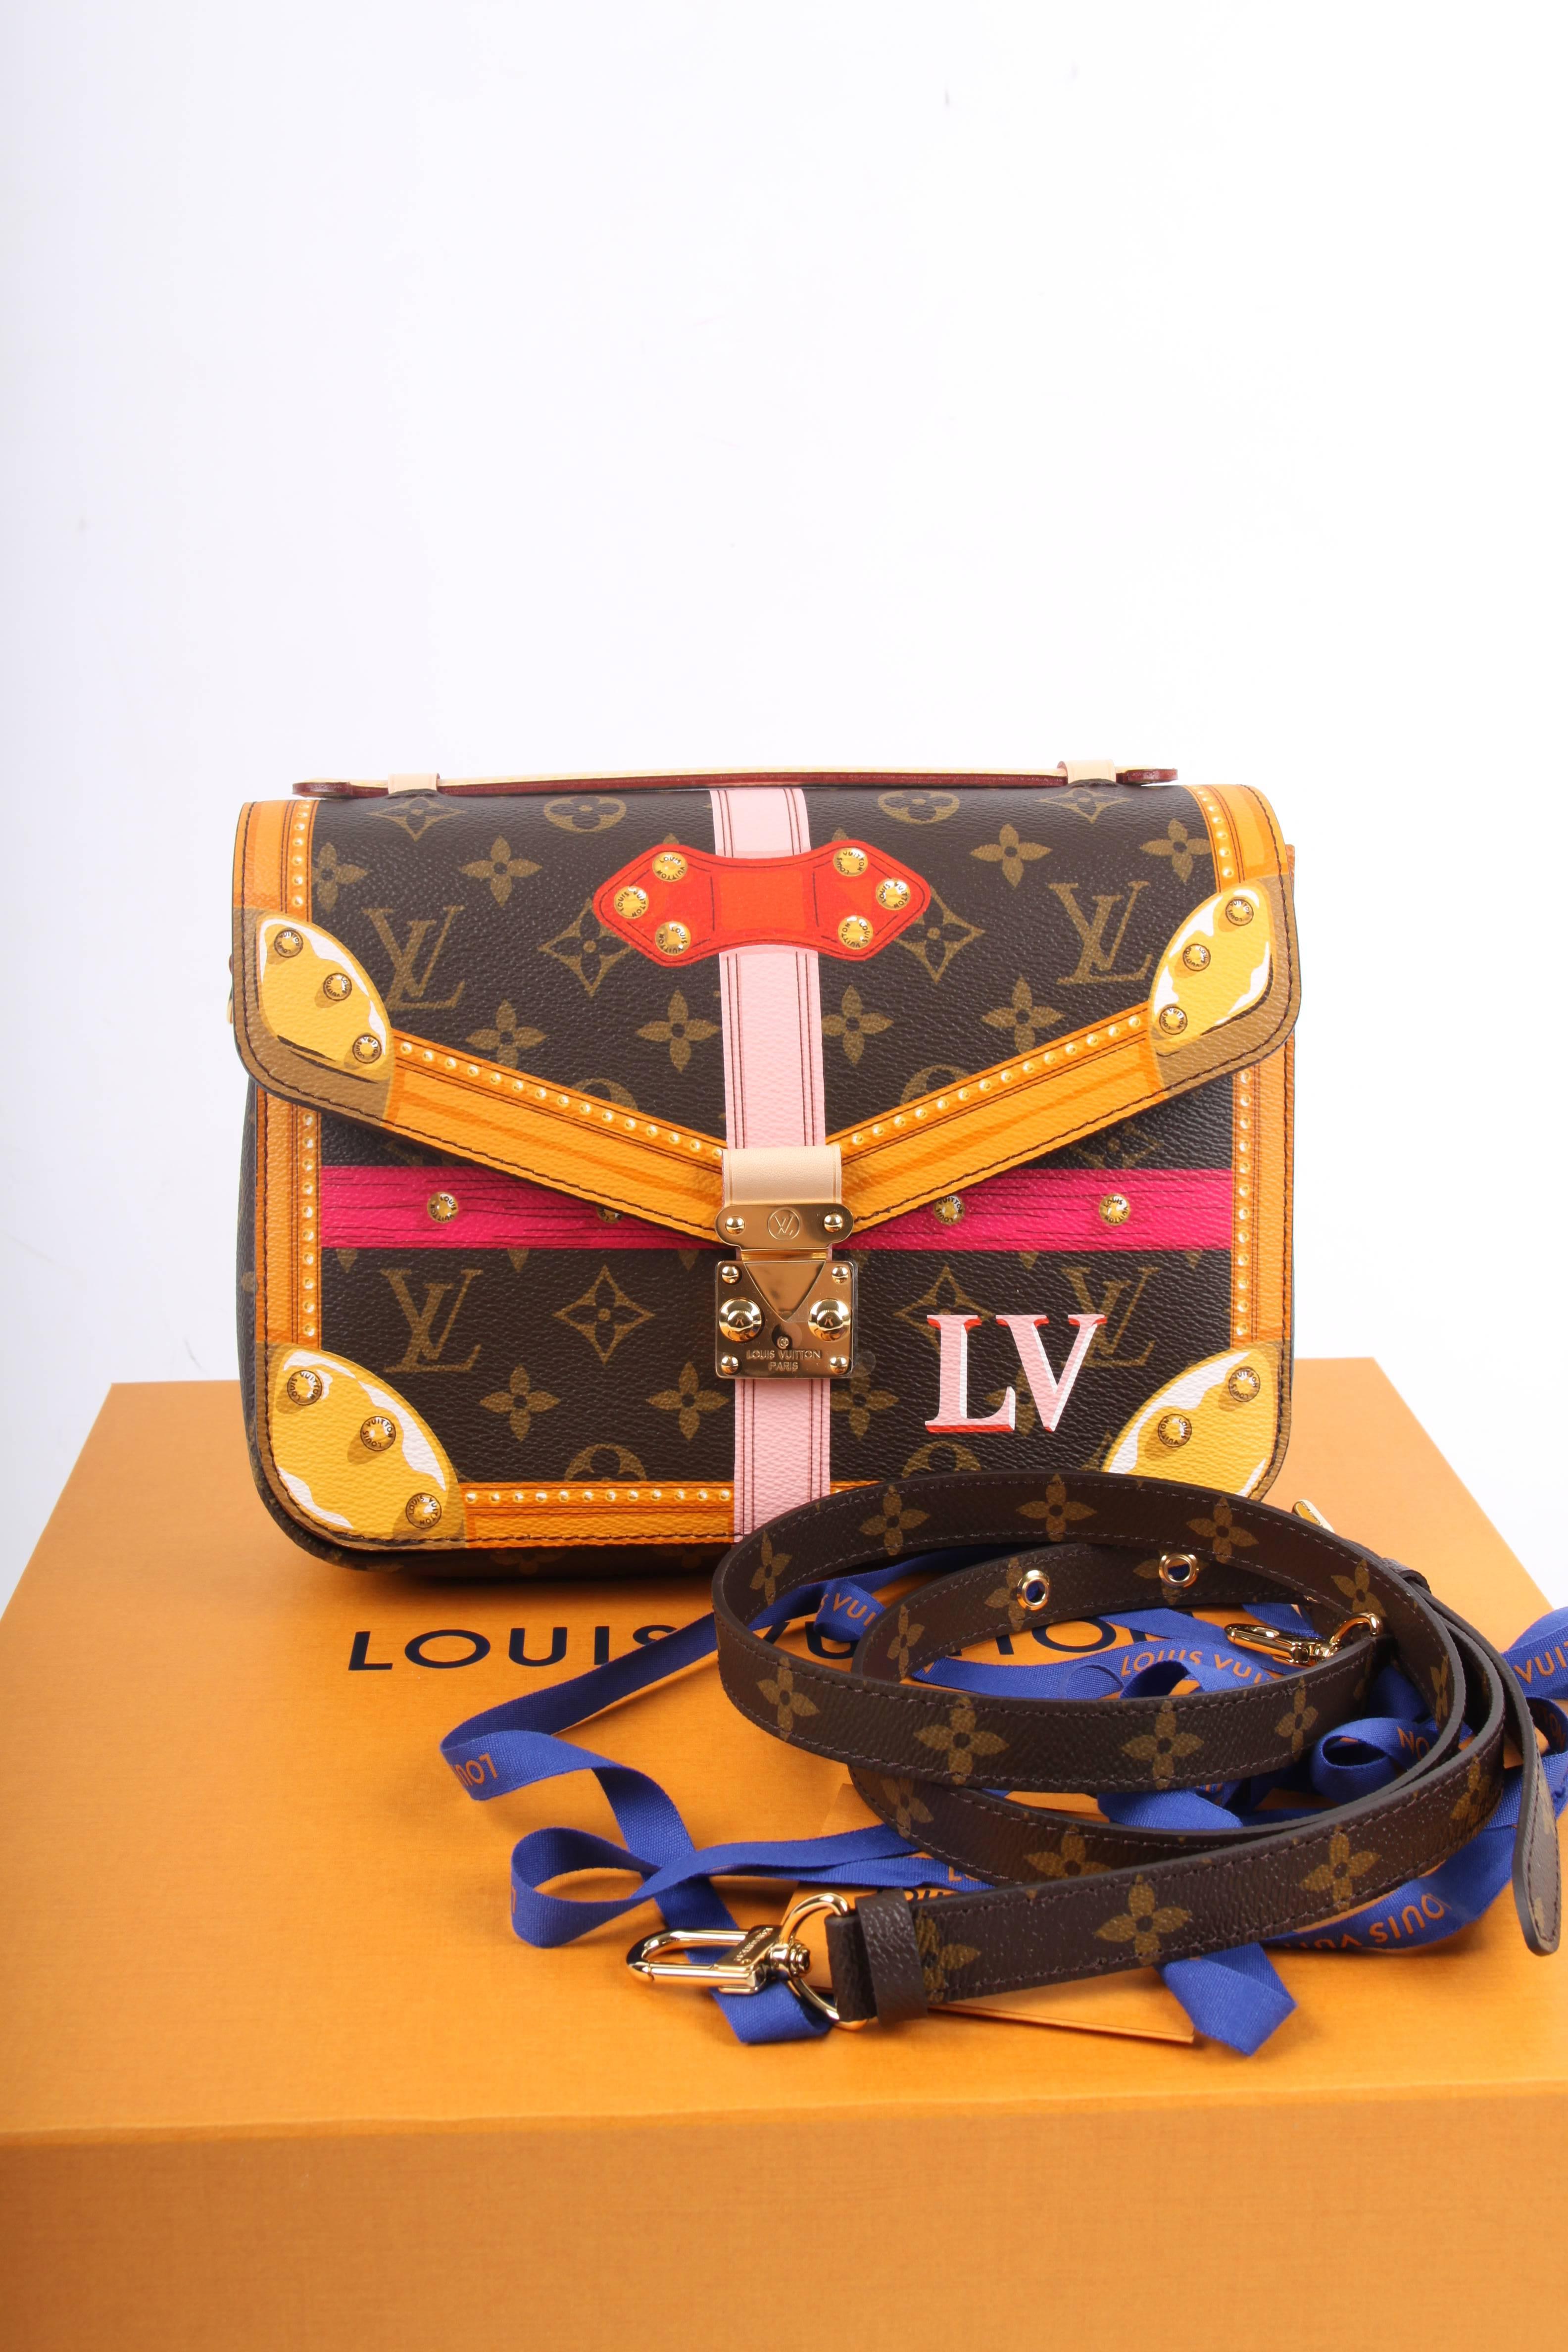 This is a very special Louis Vuitton Métis. Limited Edition 2018 and storefresh! Neat!!

Fully crafted from the well known dark brown canvas covered with LV monograms. The front, back and flap are decorated with artwork in fuchsia, pink and yellow.